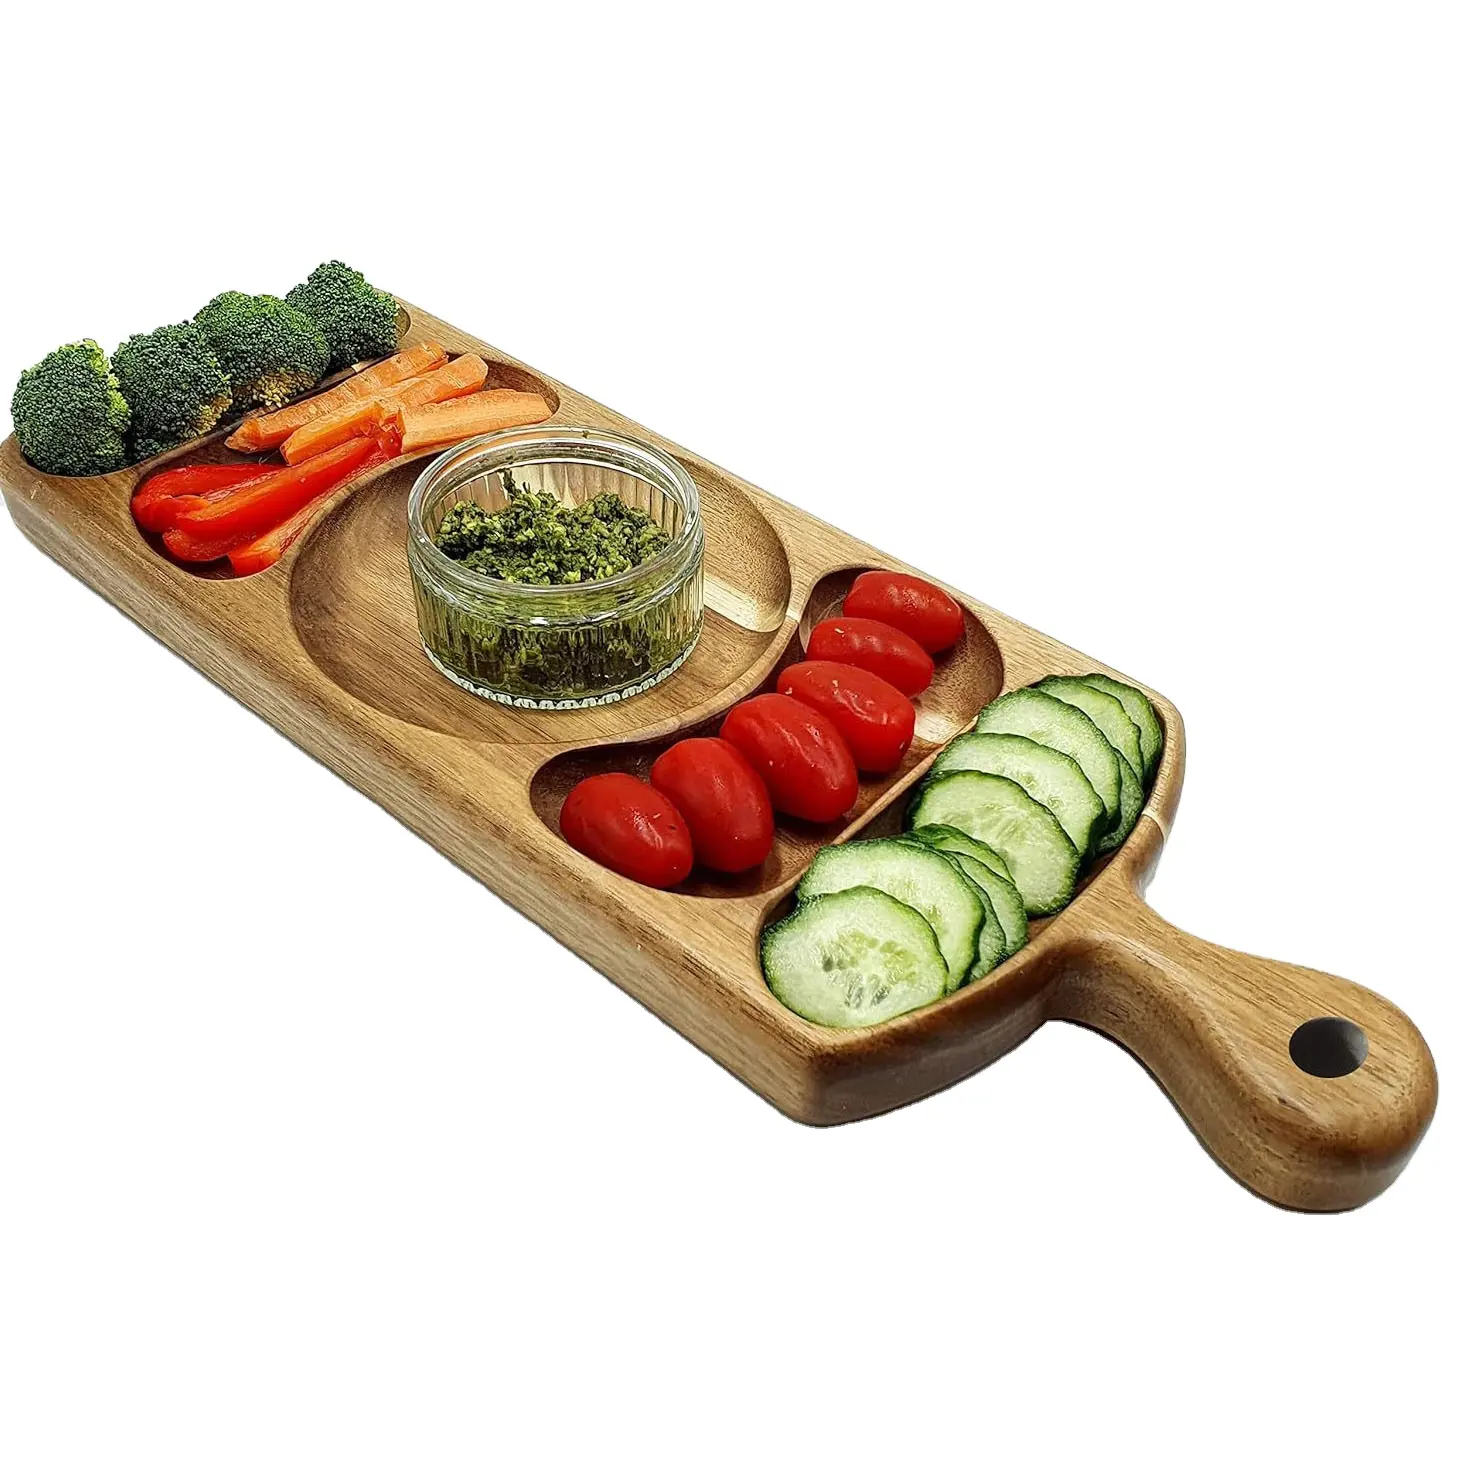 Best Selling Solid Wood Acacia Rectangular Tray with Handles Food and Snack Classification Wood Party Tray Serving Dish